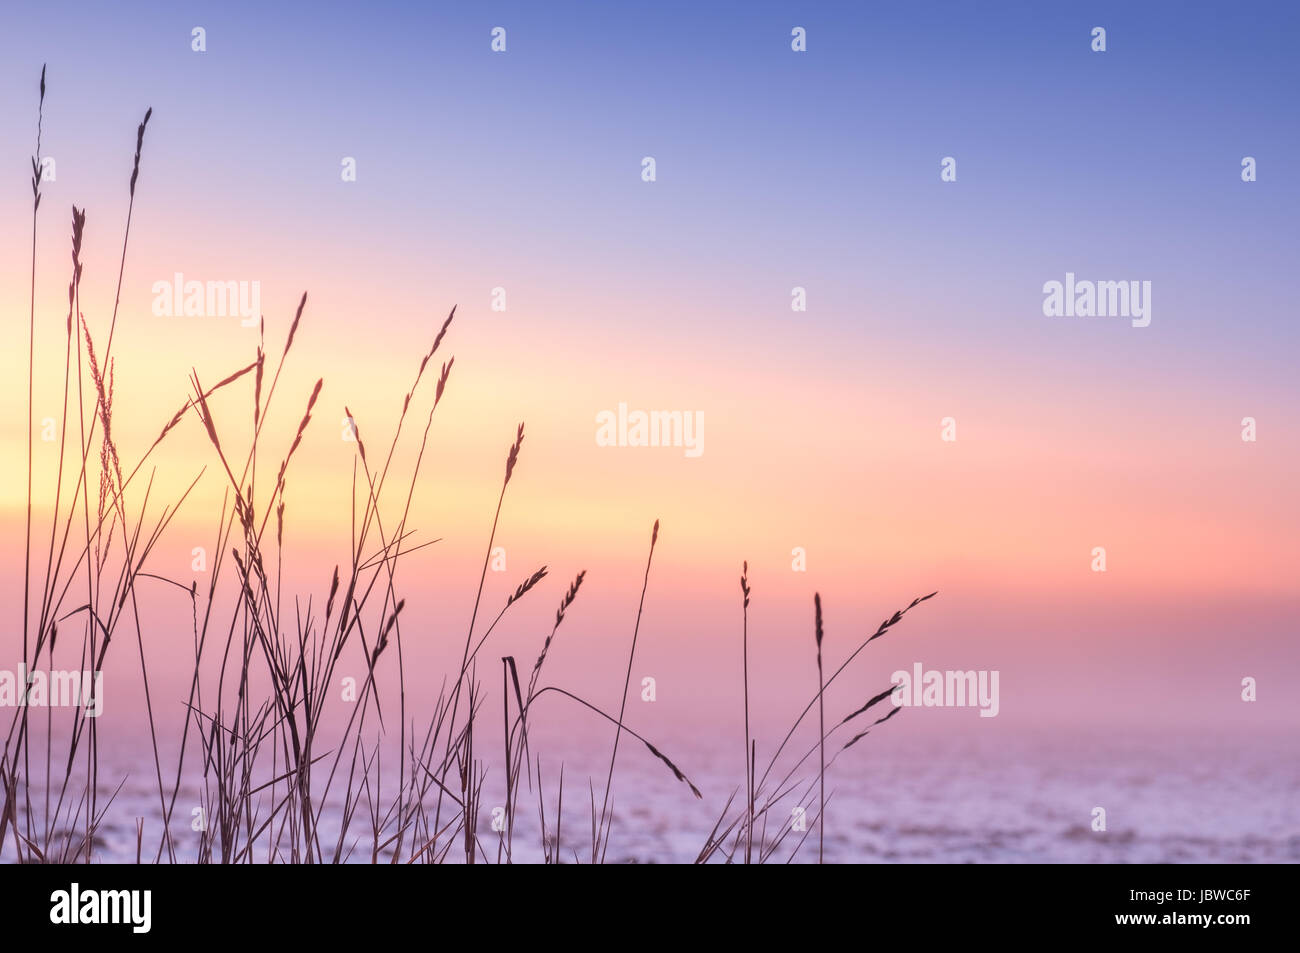 Foggy and colorful sunset with foreground grass at winter evening Stock Photo